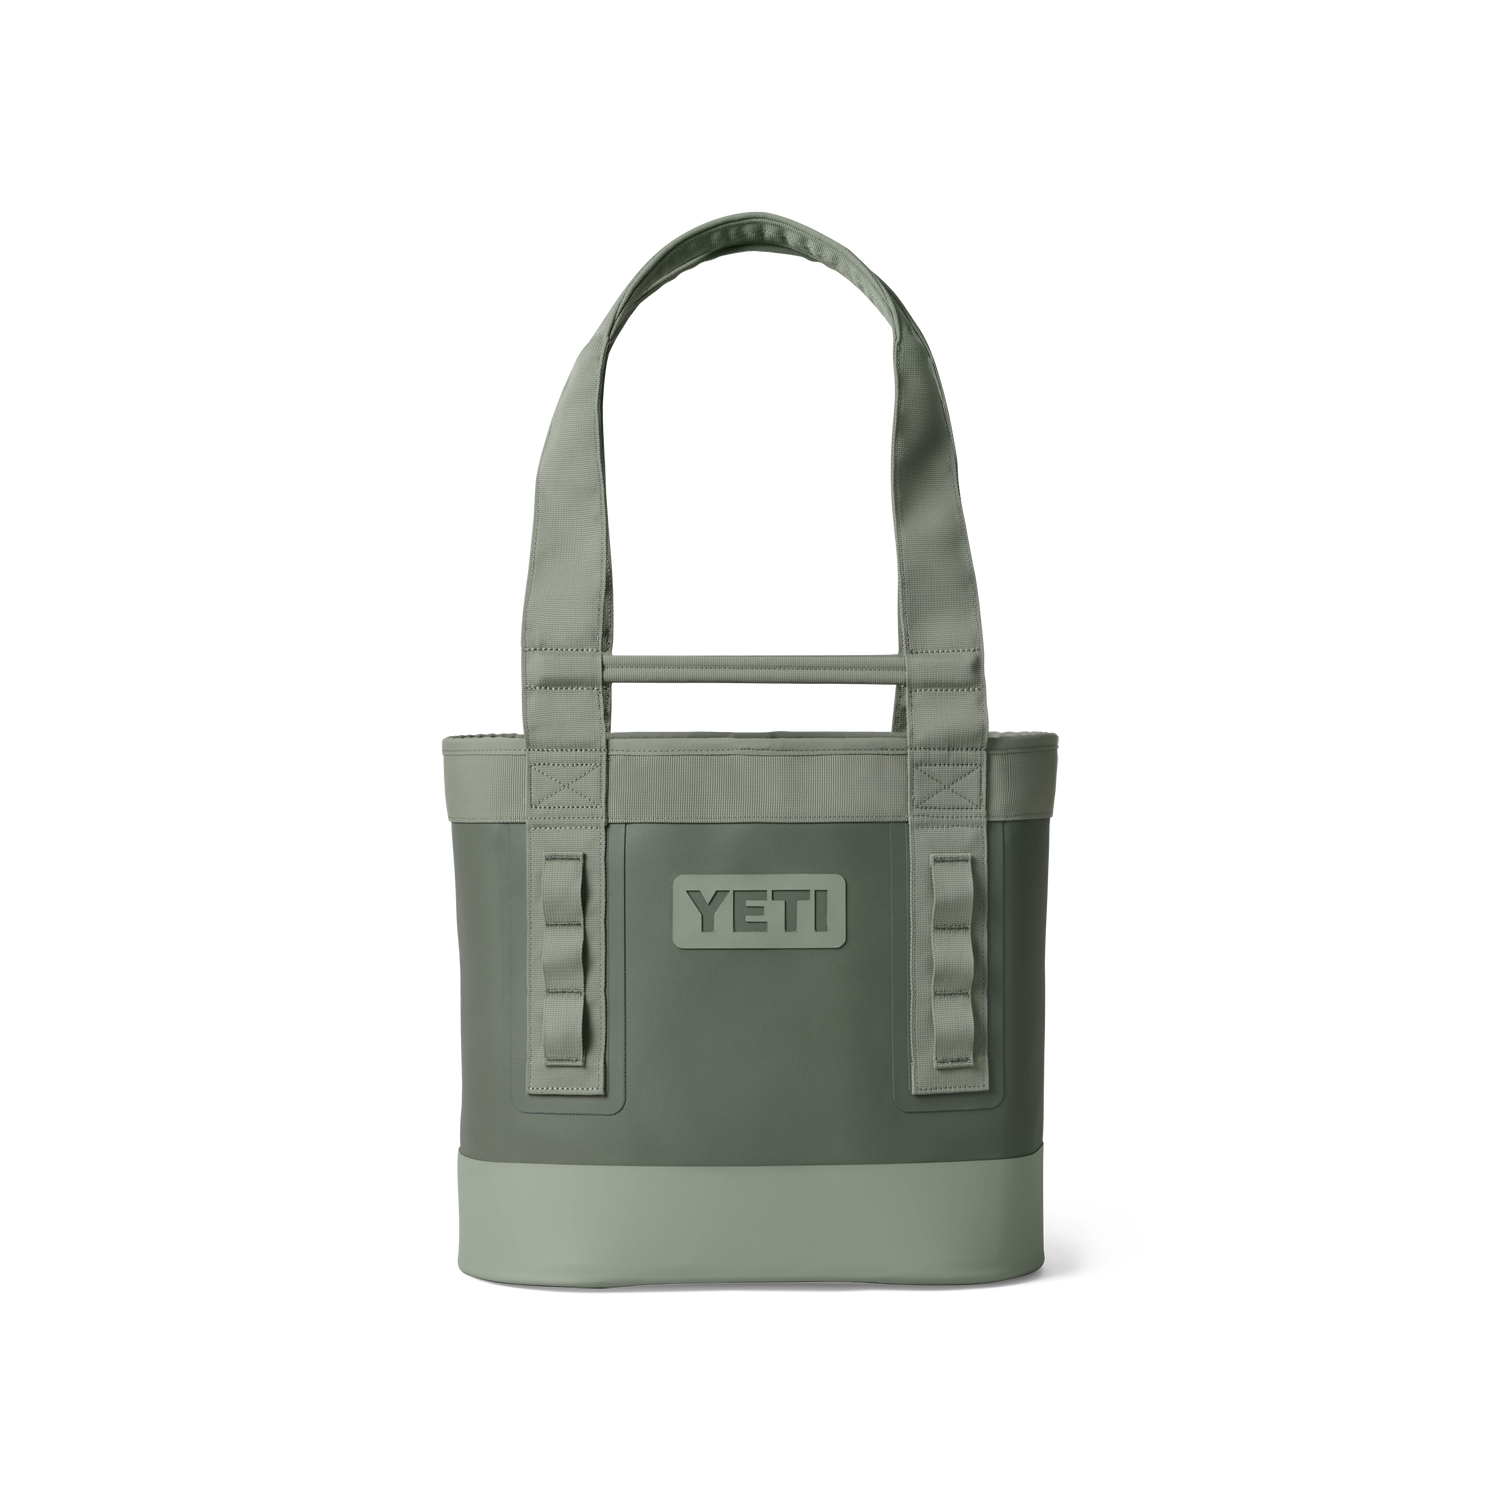 YETI coolers announces limited edition fall colors